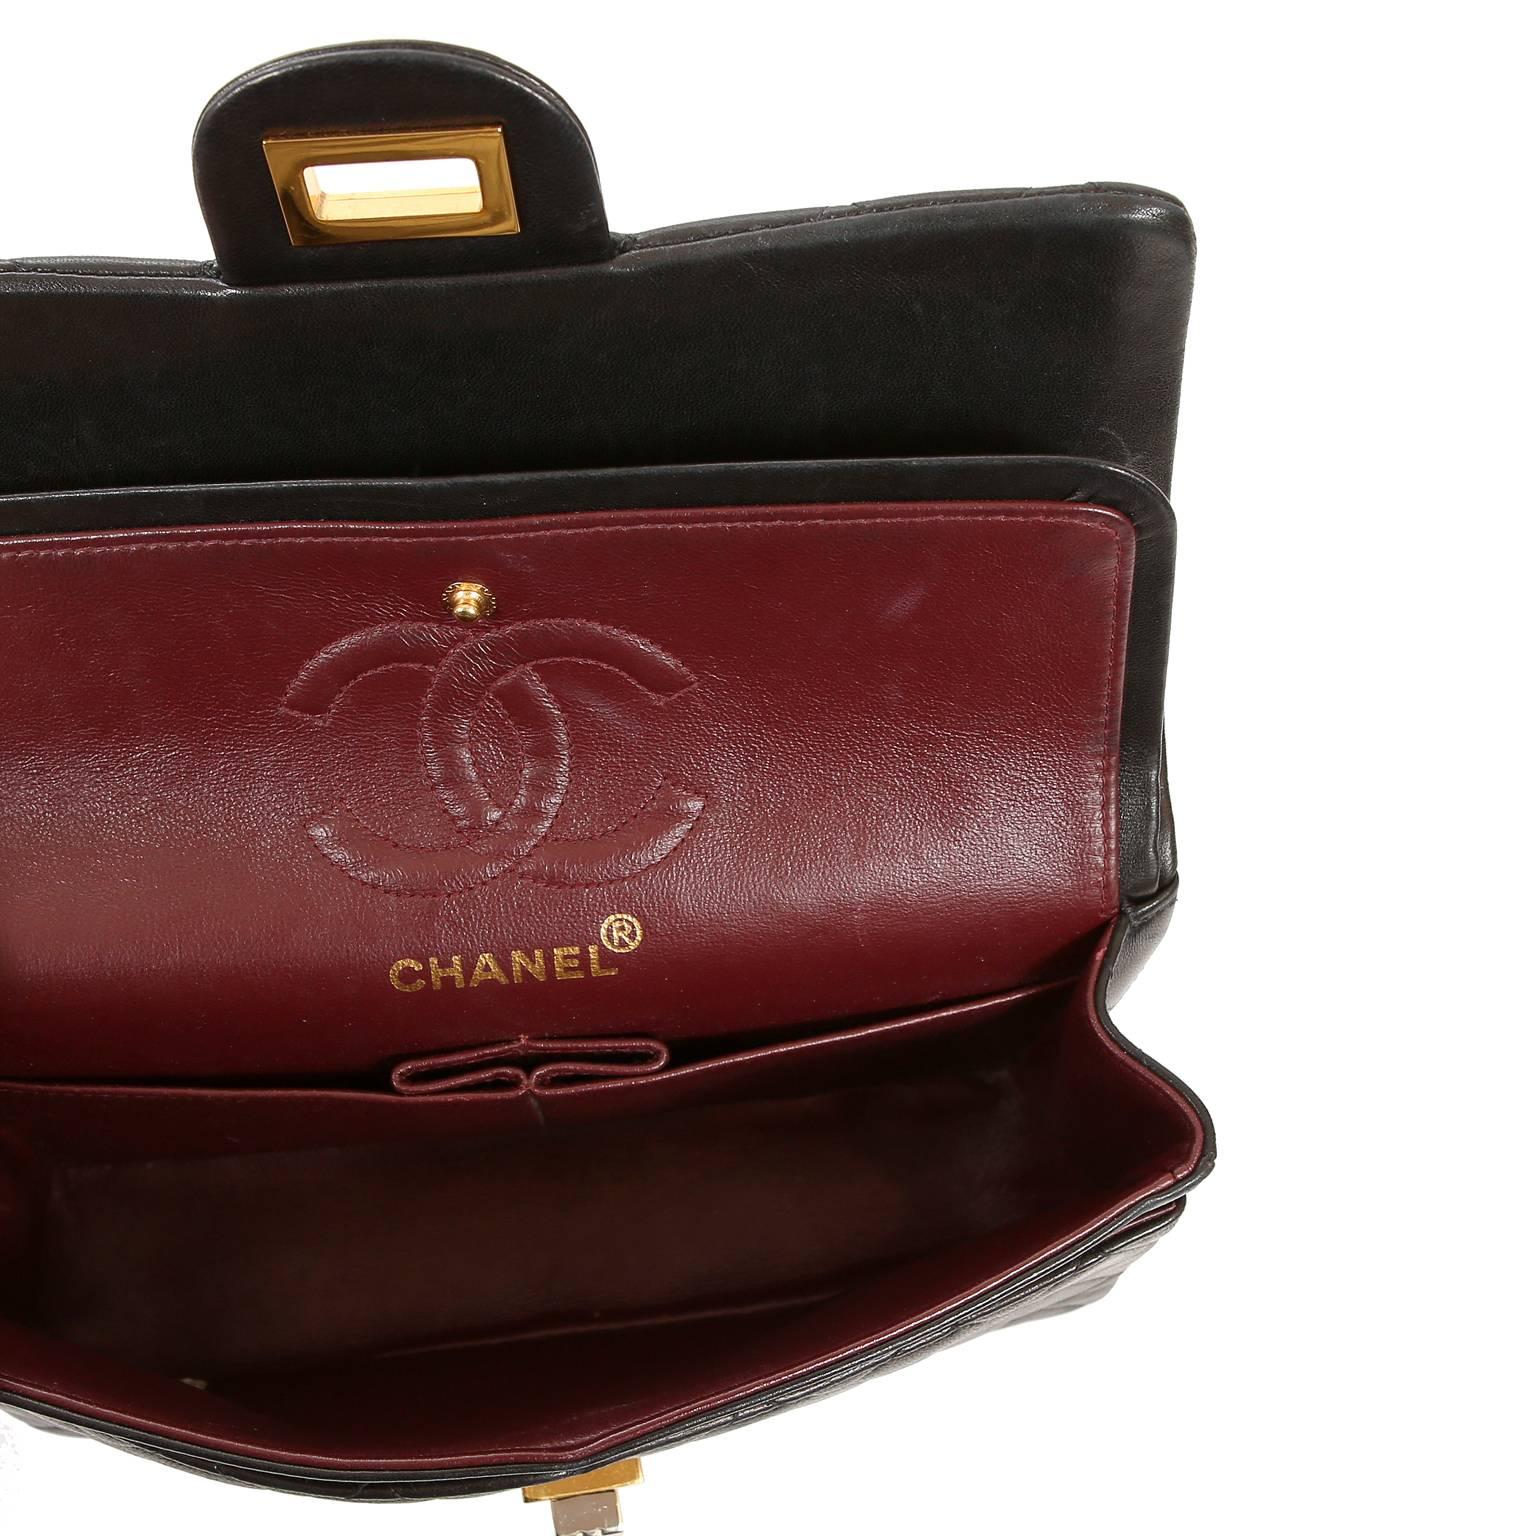 Chanel Black Lambskin 2.55 Reissue Medium Flap Bag with Gold Hardware For Sale 1